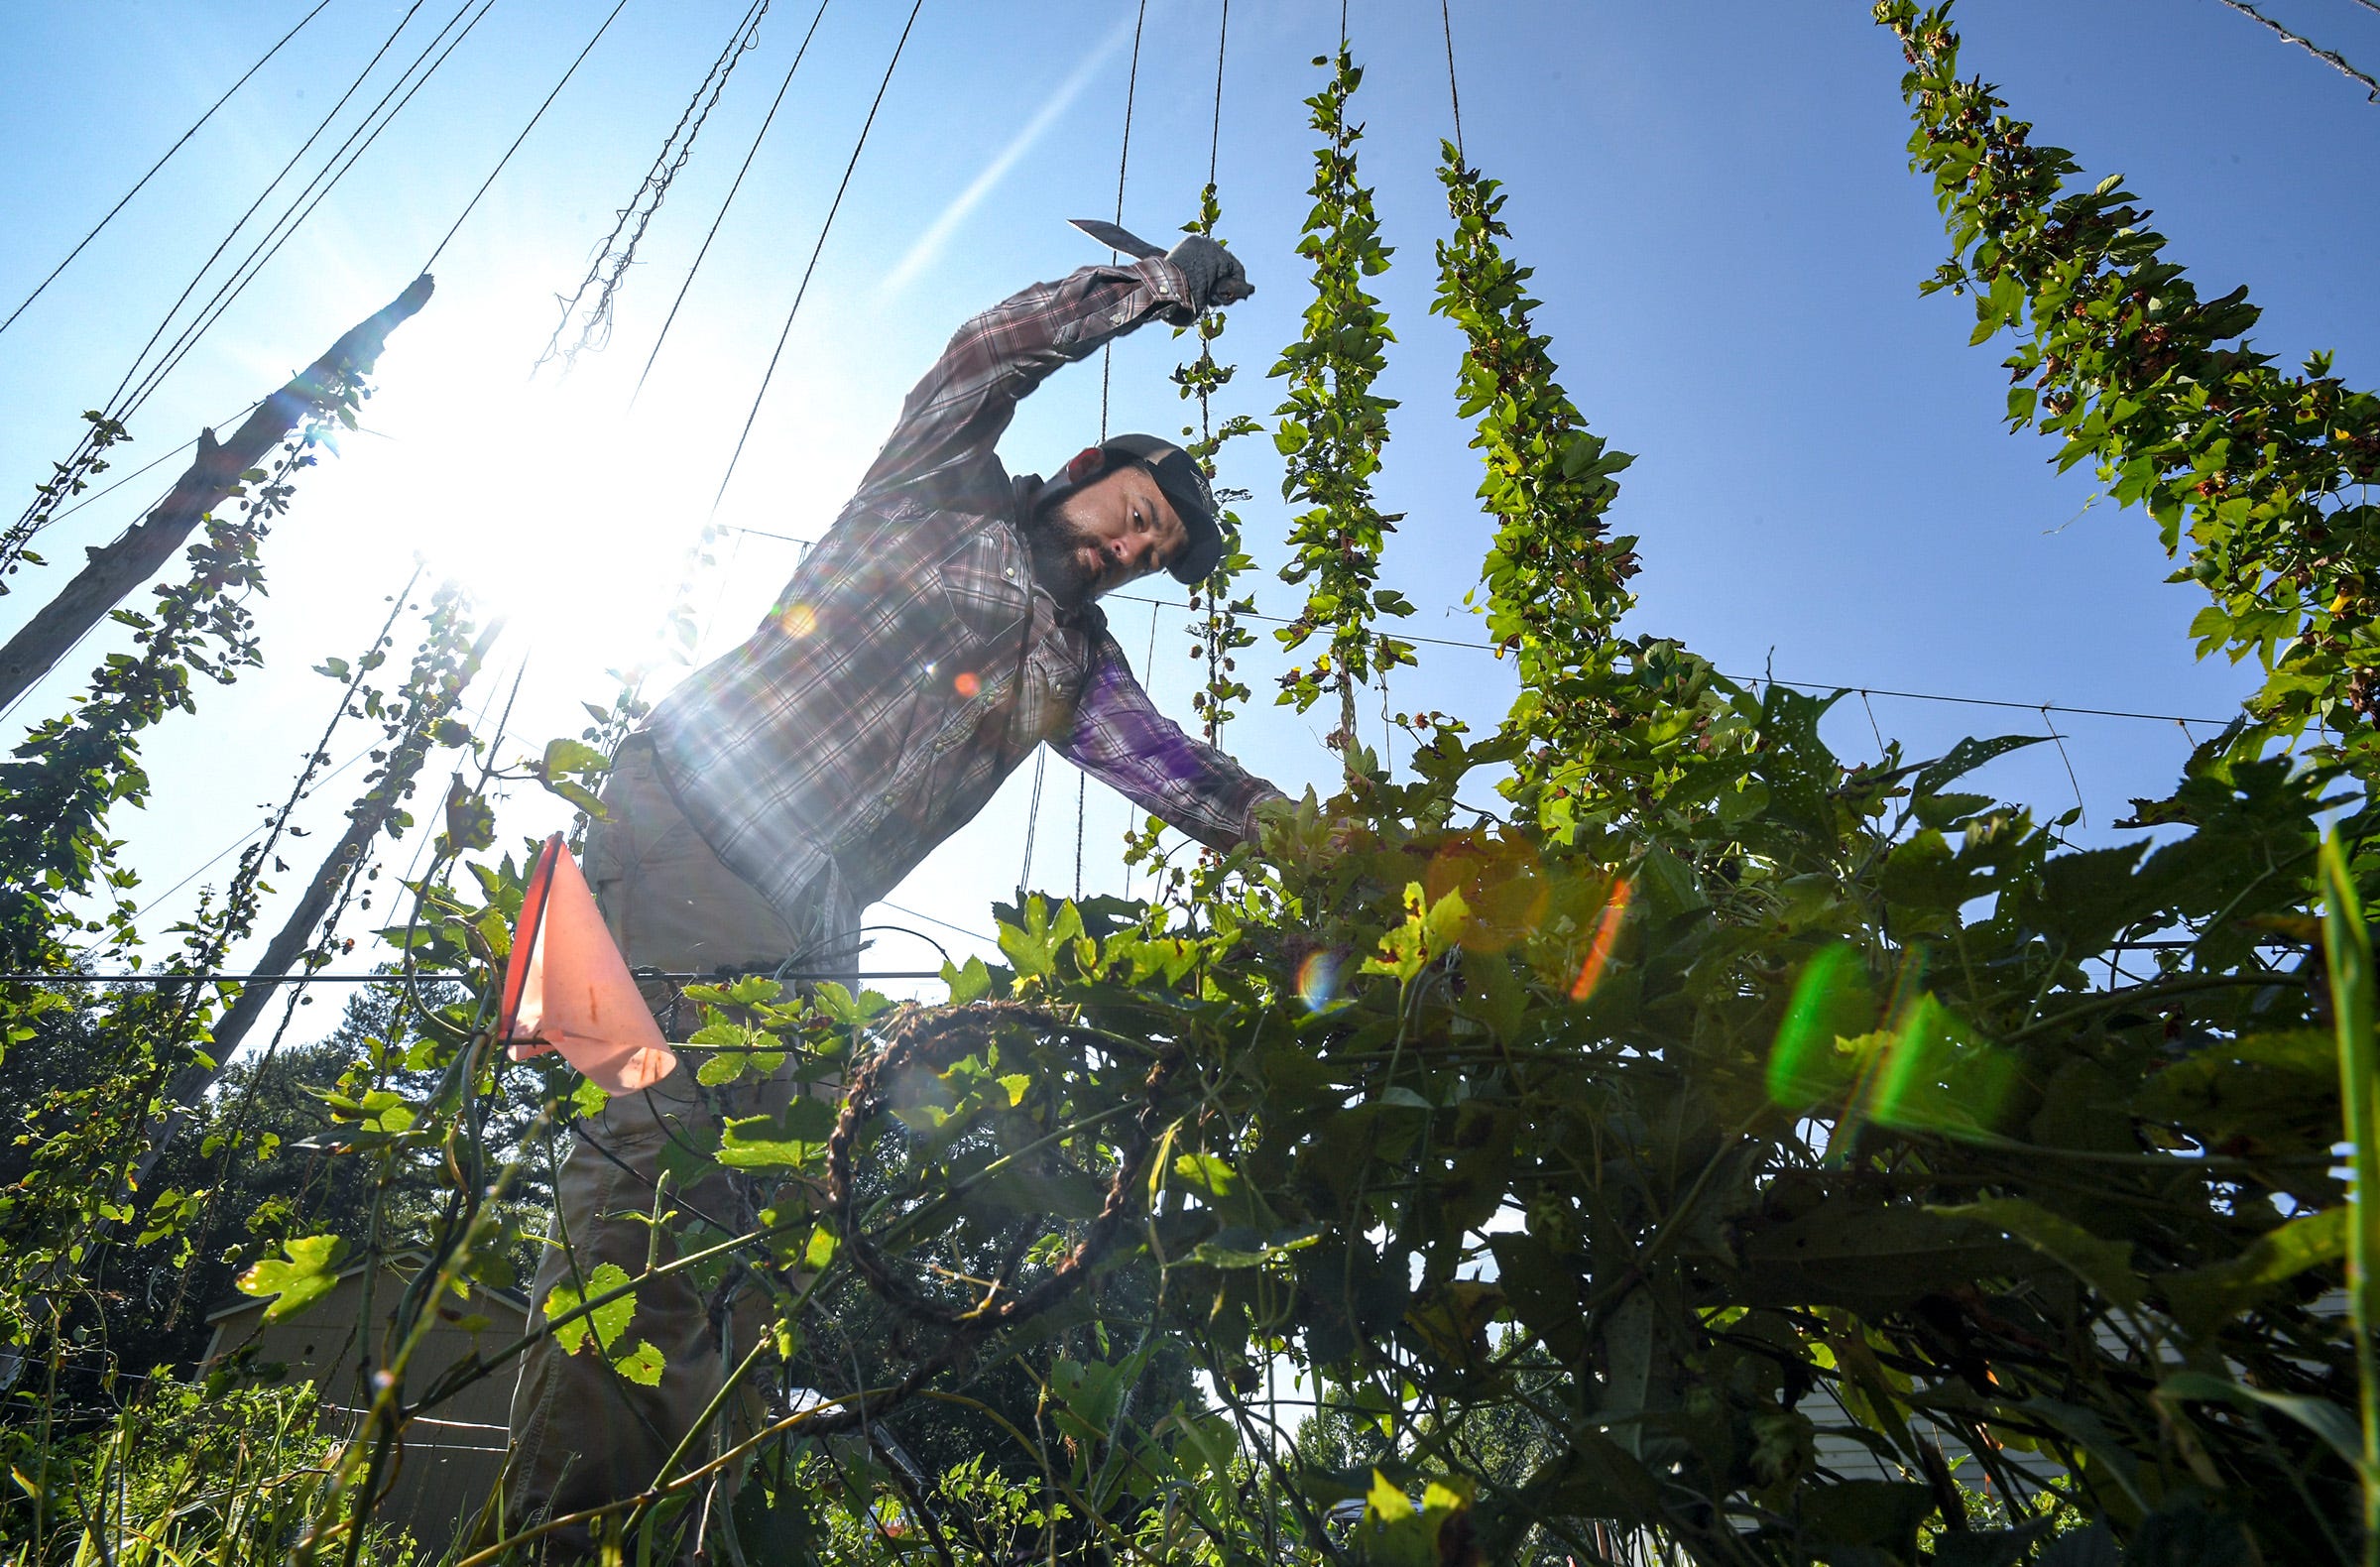 David Thornton, co-owner of Carolina Bauernhaus Brewery & Winery, with locations in Anderson and Greenville, S.C. harvests hops at the Oconee Hop Farm in Salem, S.C. Tuesday, July 27, 2021. 